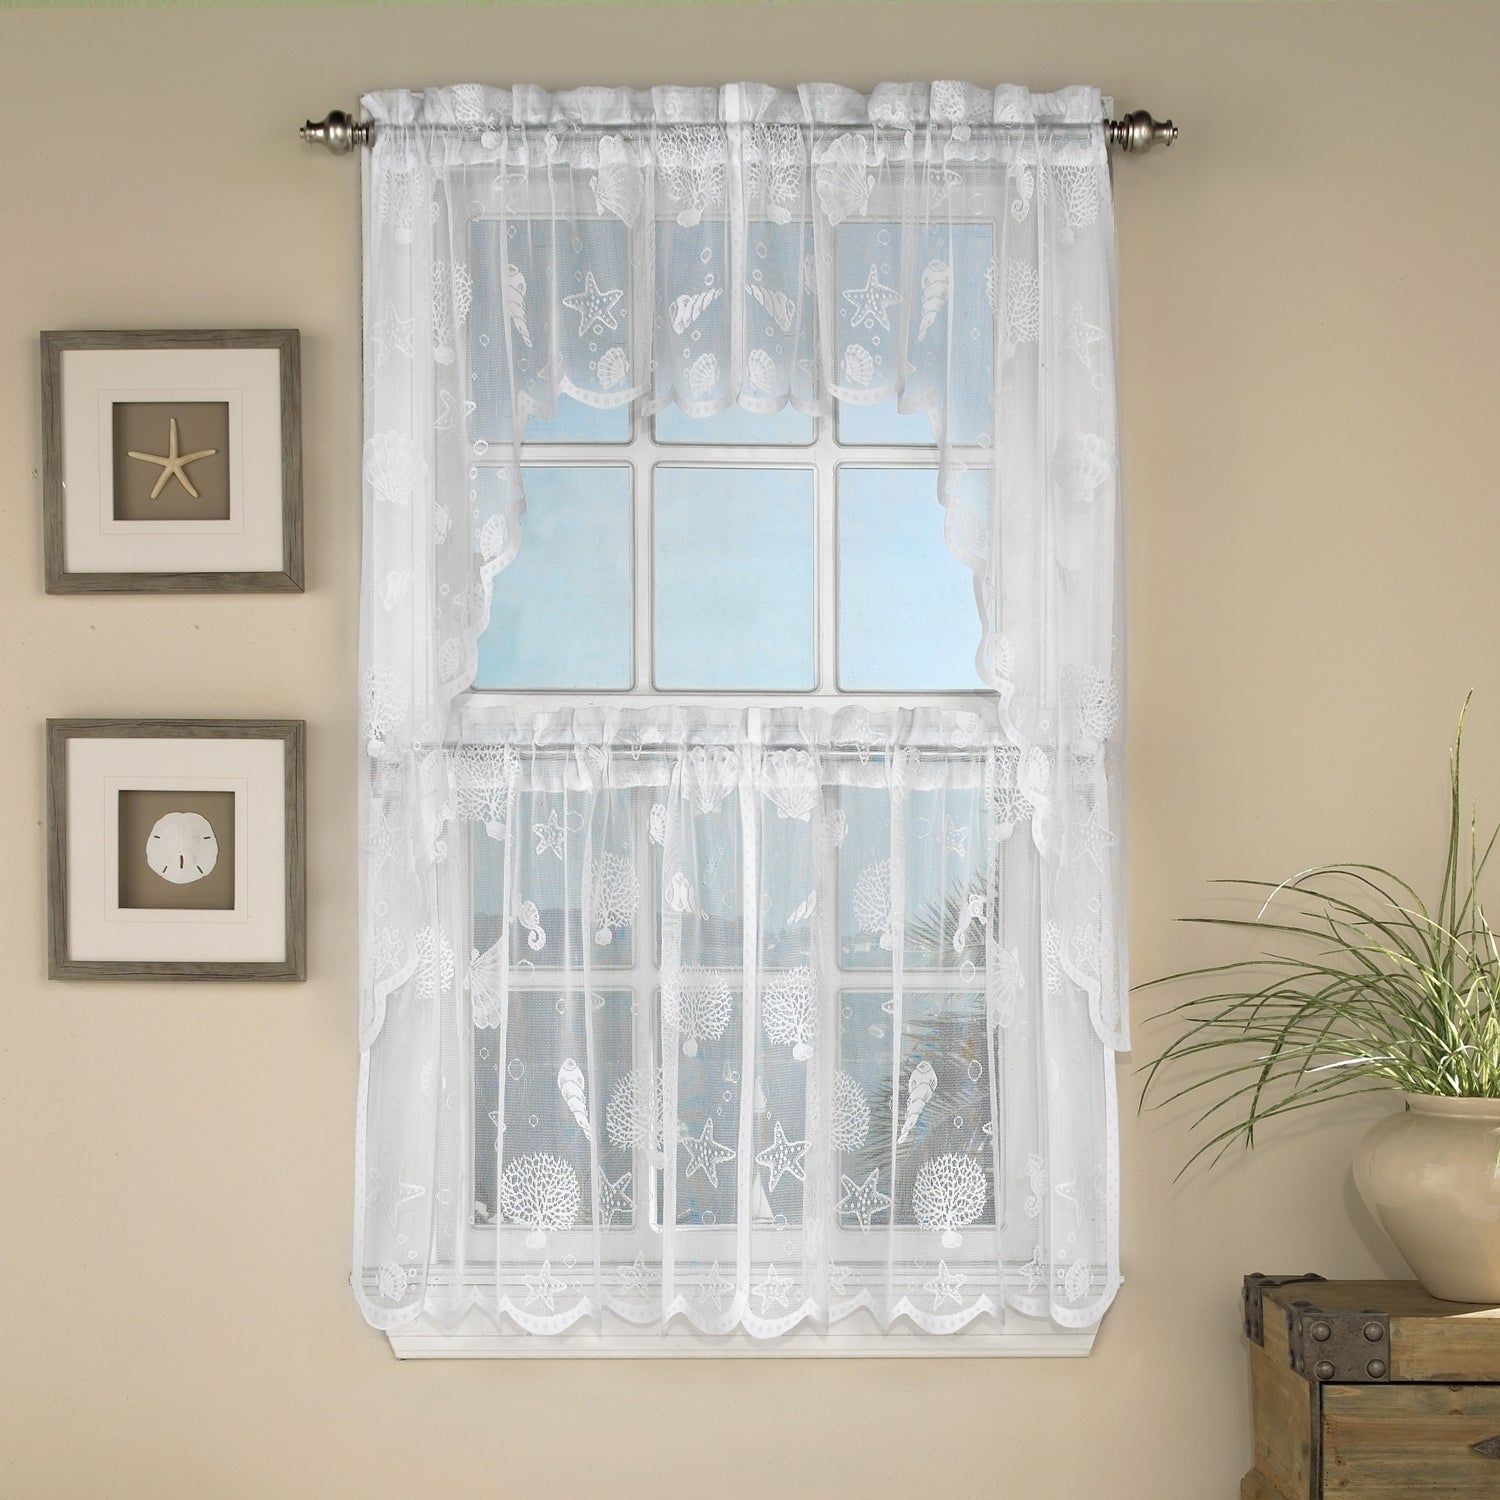 Marine Life Motif Knitted Lace Window Curtain Pieces Pertaining To Elegant White Priscilla Lace Kitchen Curtain Pieces (Photo 6 of 20)